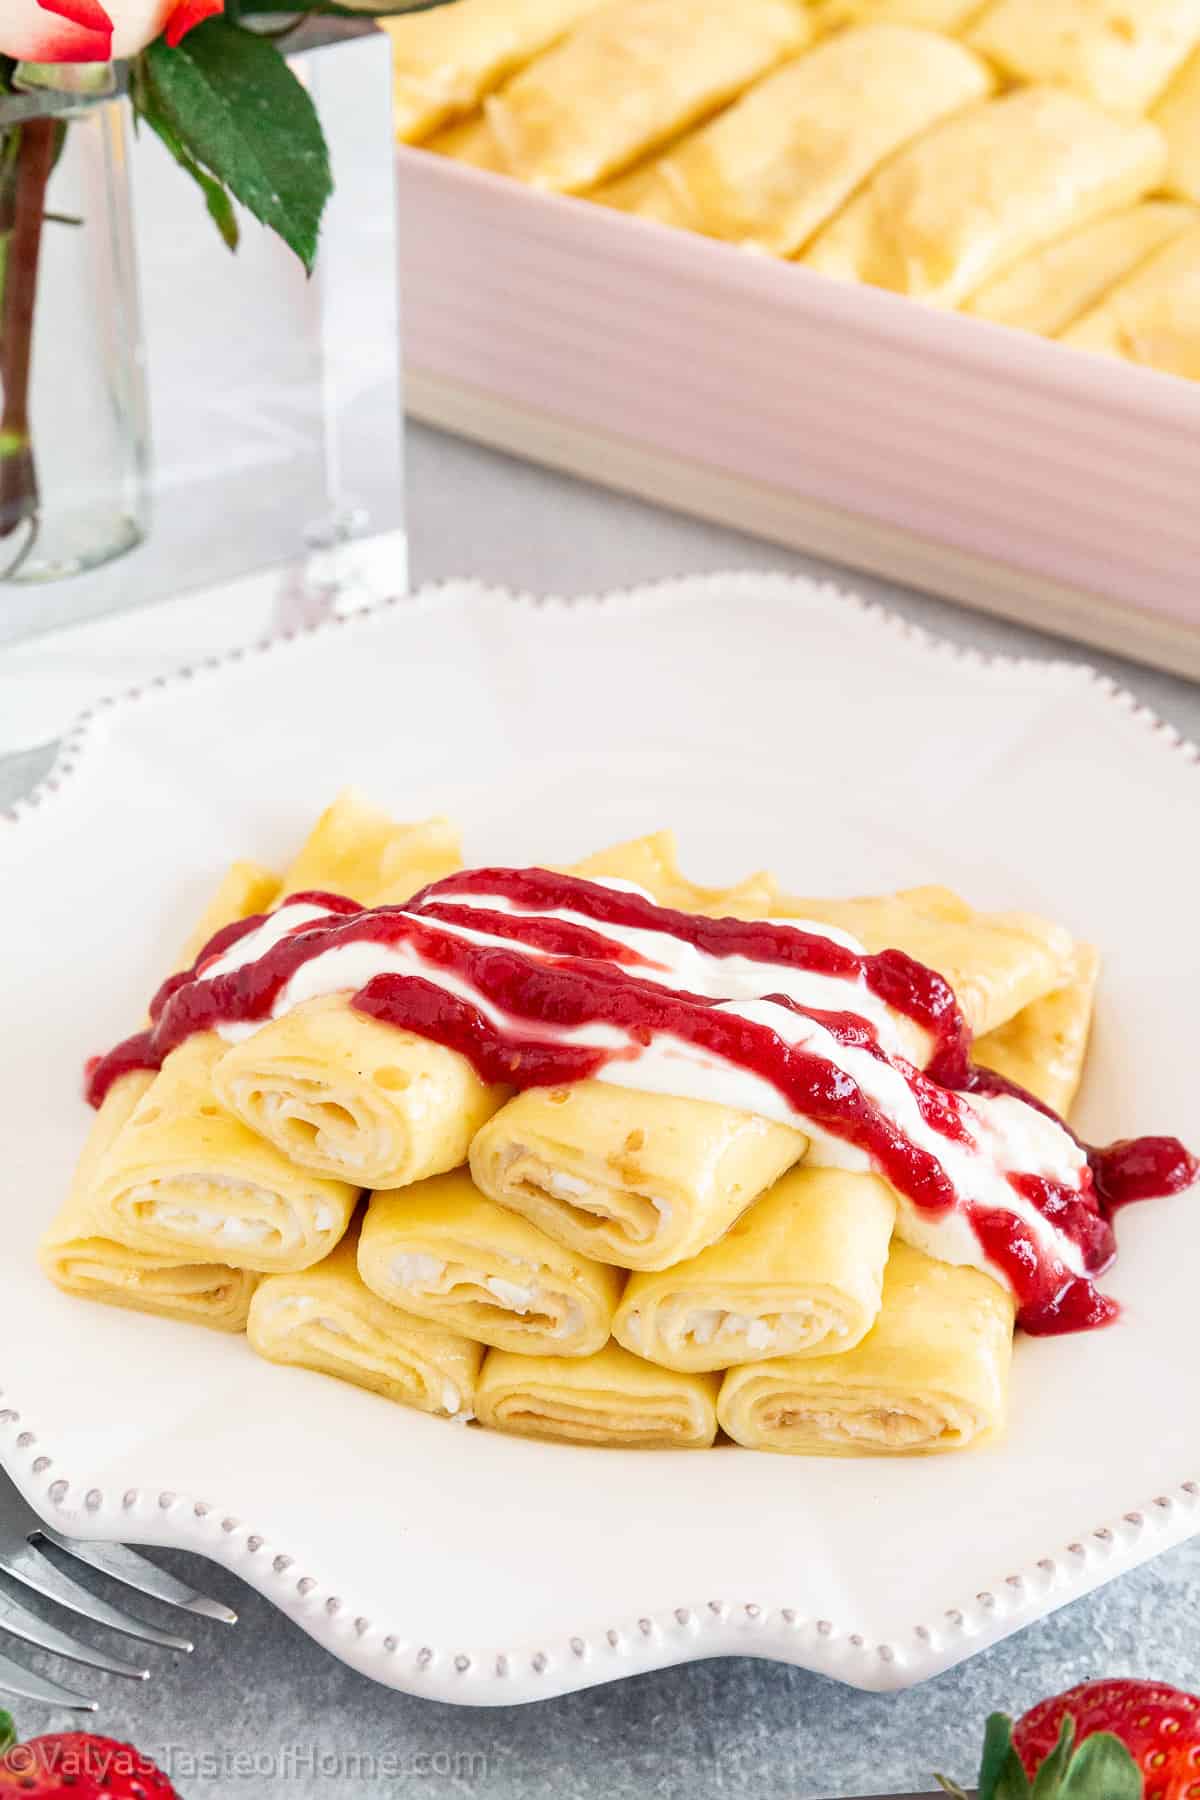 Making them from scratch may seem hard, but anyone can create these delicious crepes at home with a few simple ingredients and a little practice.